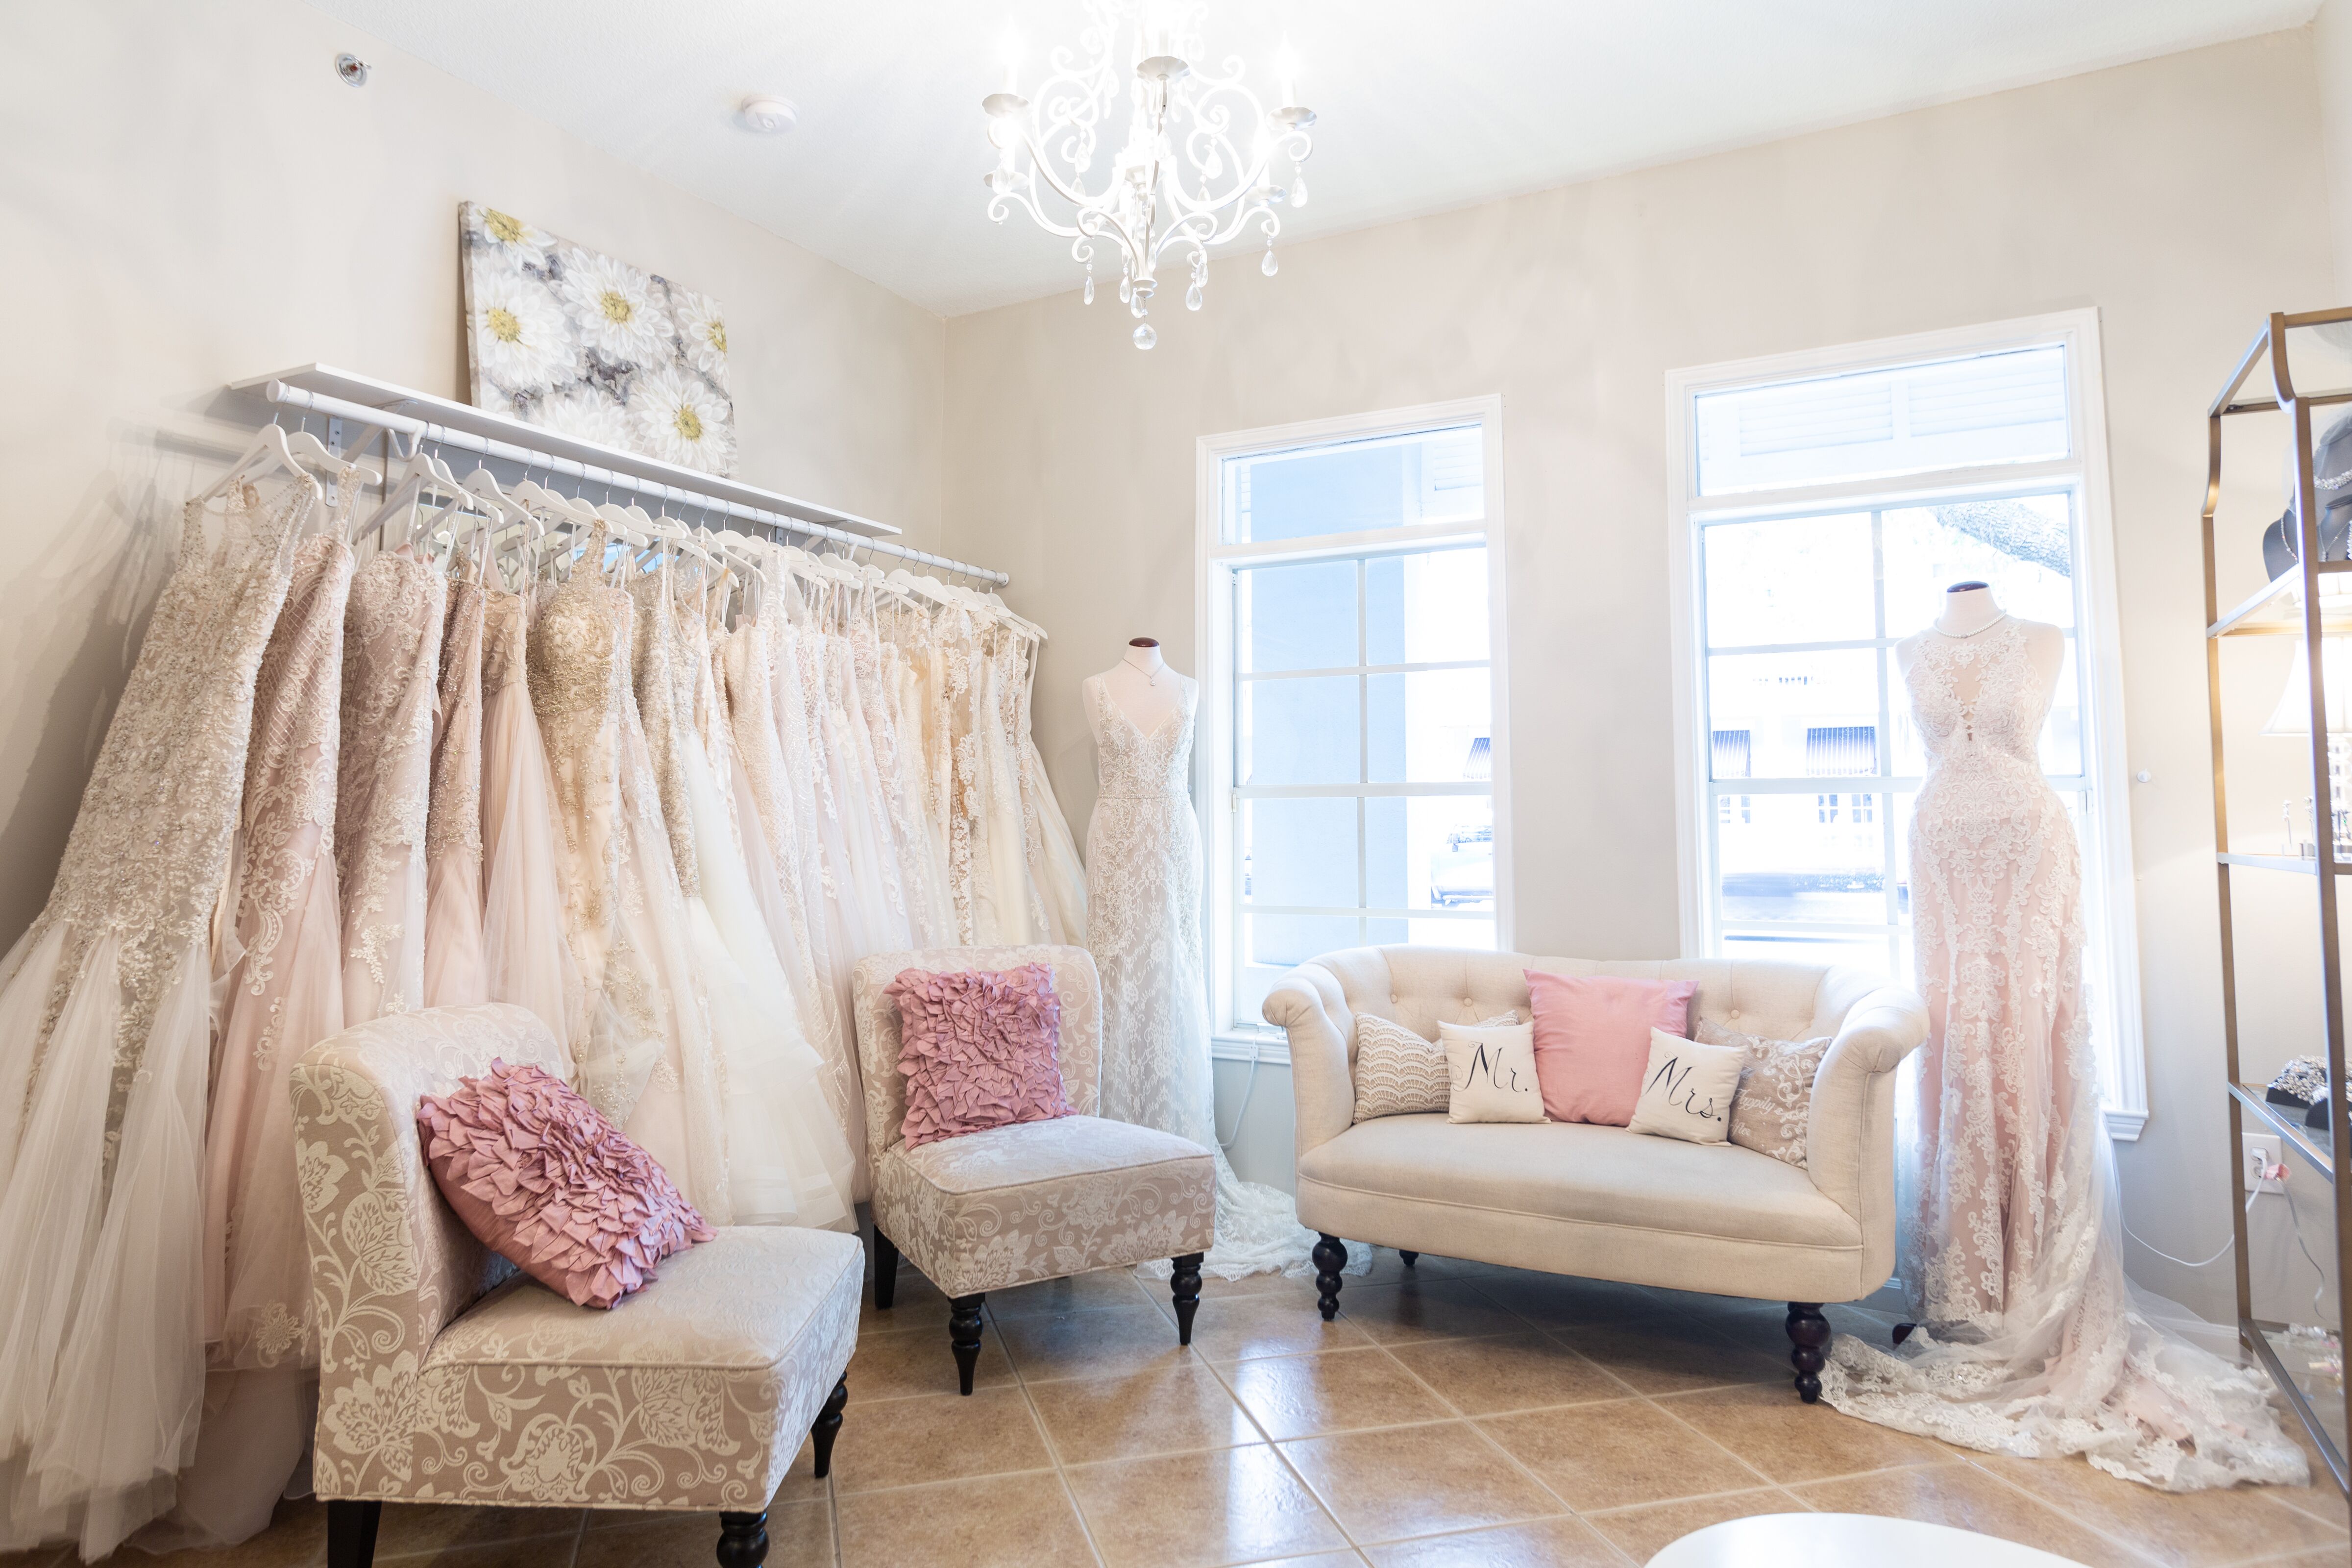 The Dressing Room Celebration | Bridal Salons - The Knot